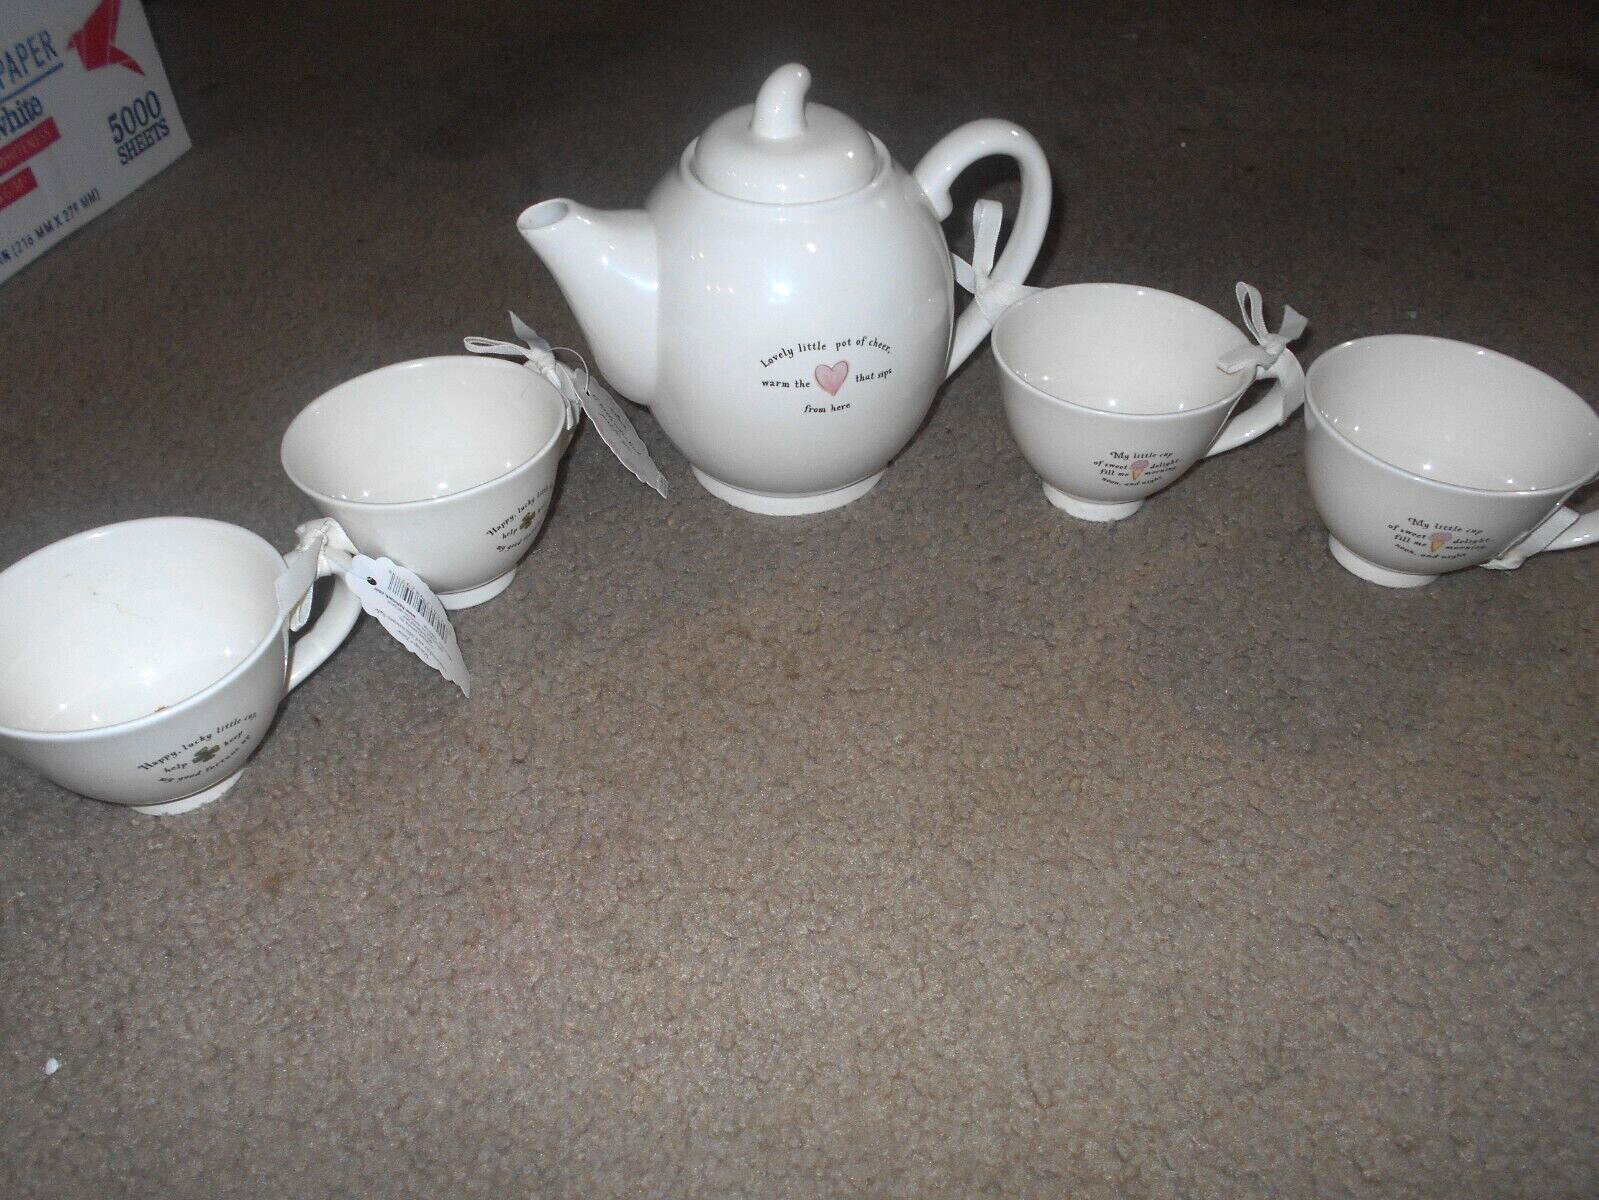 Hallmark Teapot with 4 cups Lovely and Happy little pot of cheer